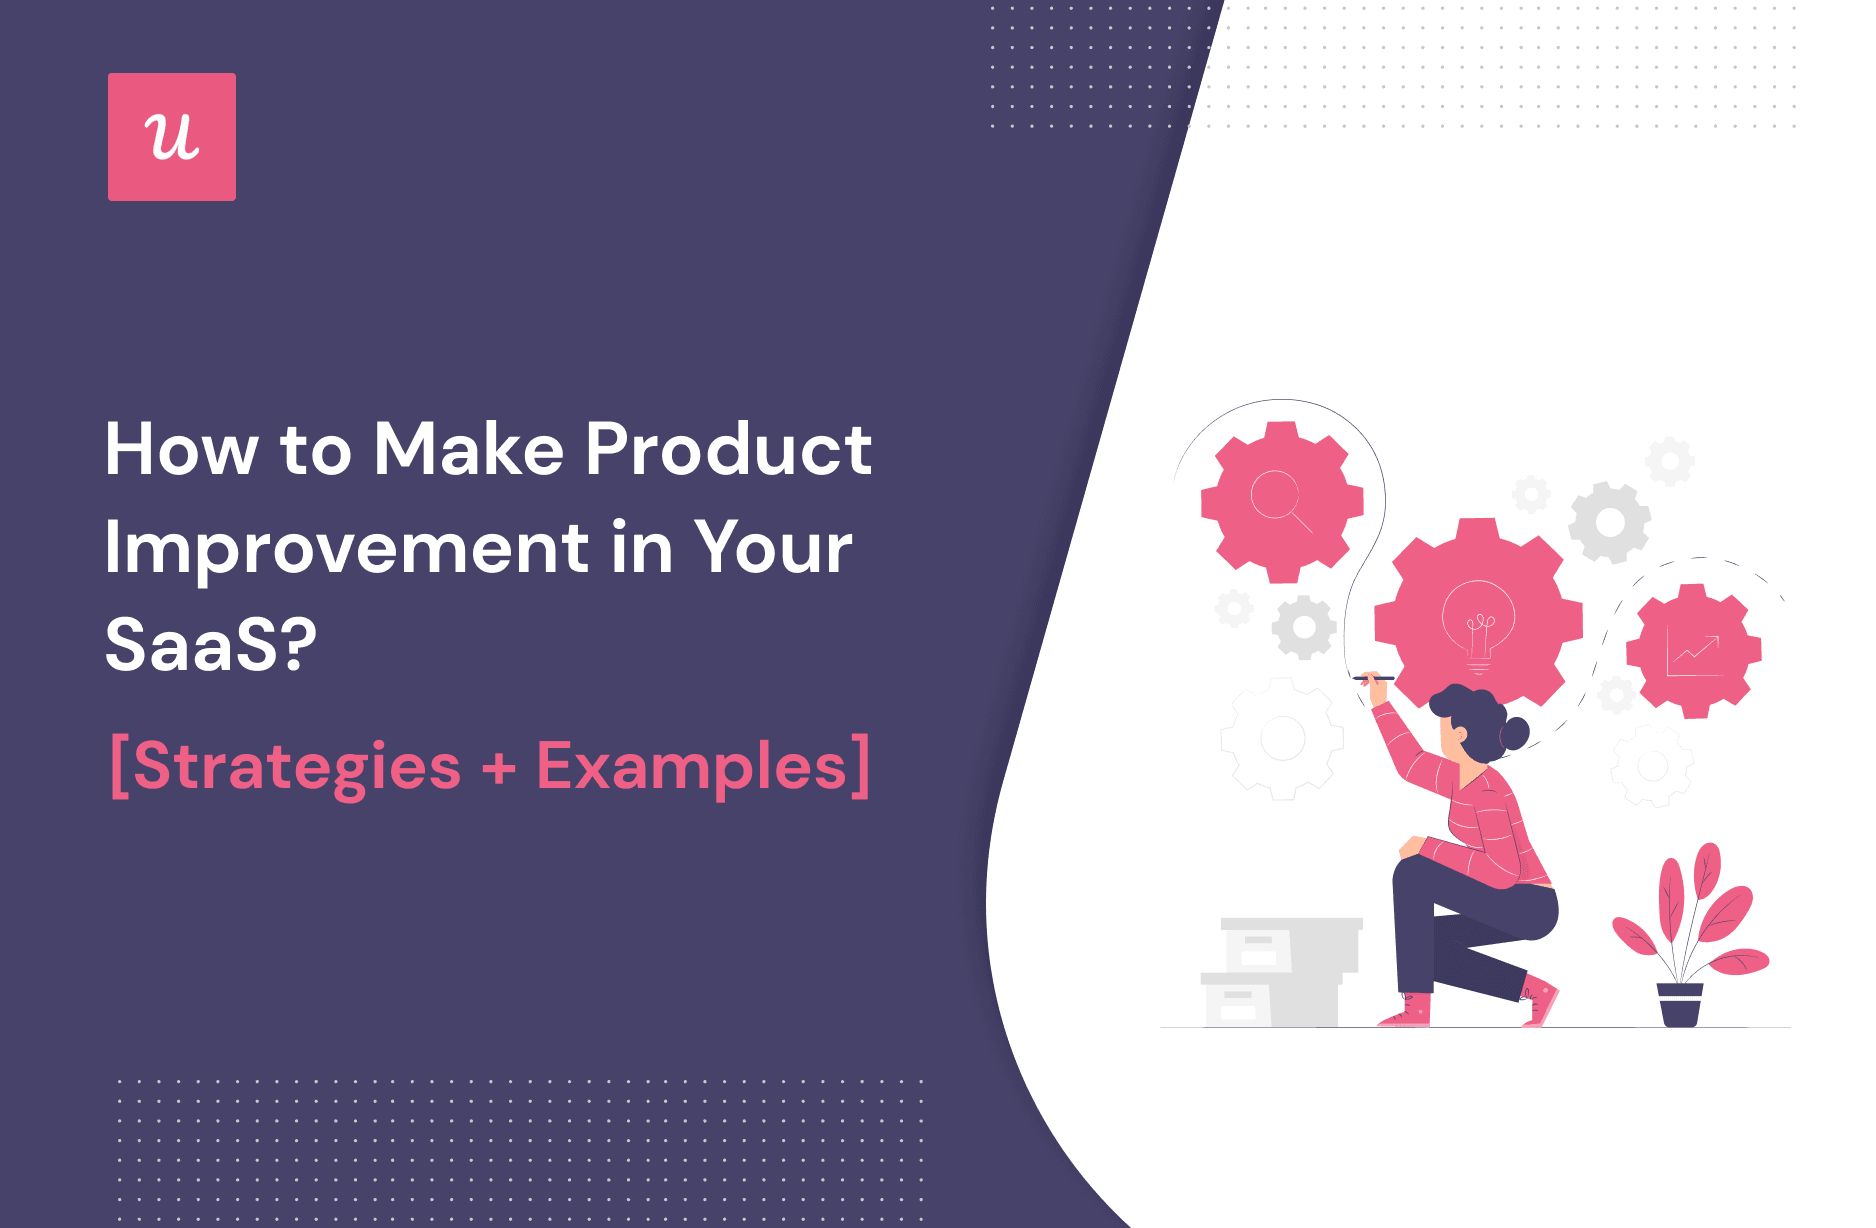 How To Make Product Improvements in SaaS? [Strategies + Examples]